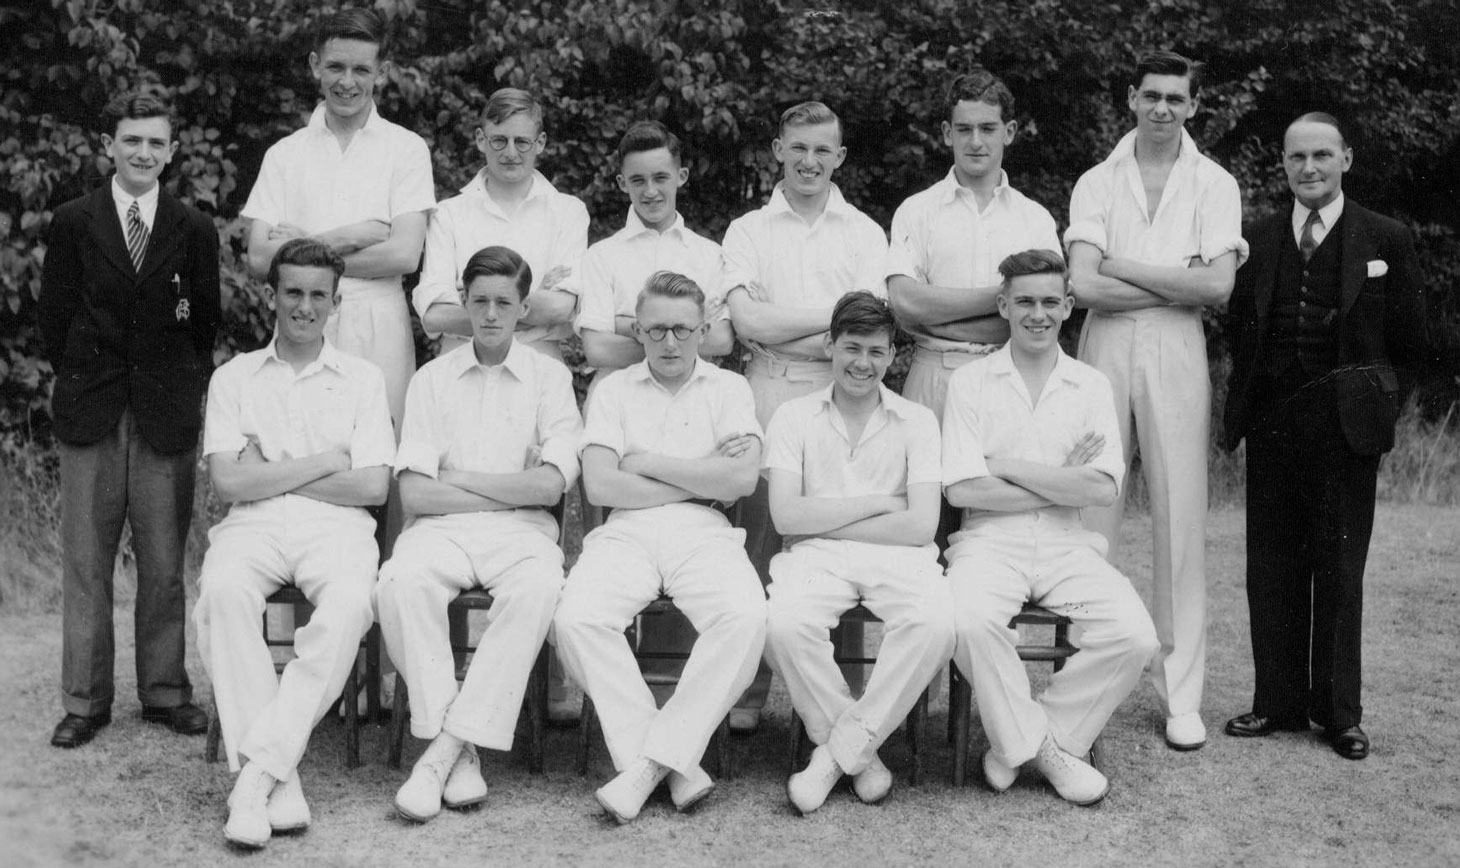 1952 cricket team (possibly second XI) - can you name anyone pictured?